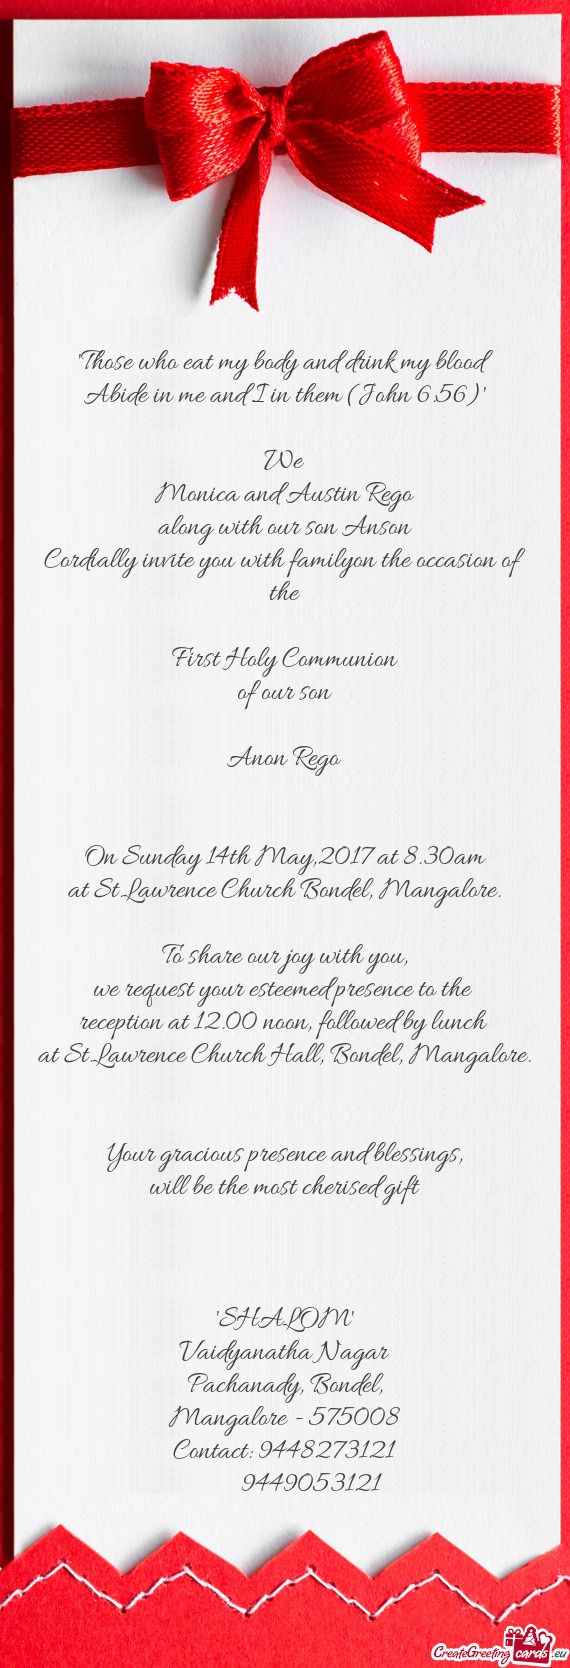 Cordially invite you with familyon the occasion of the